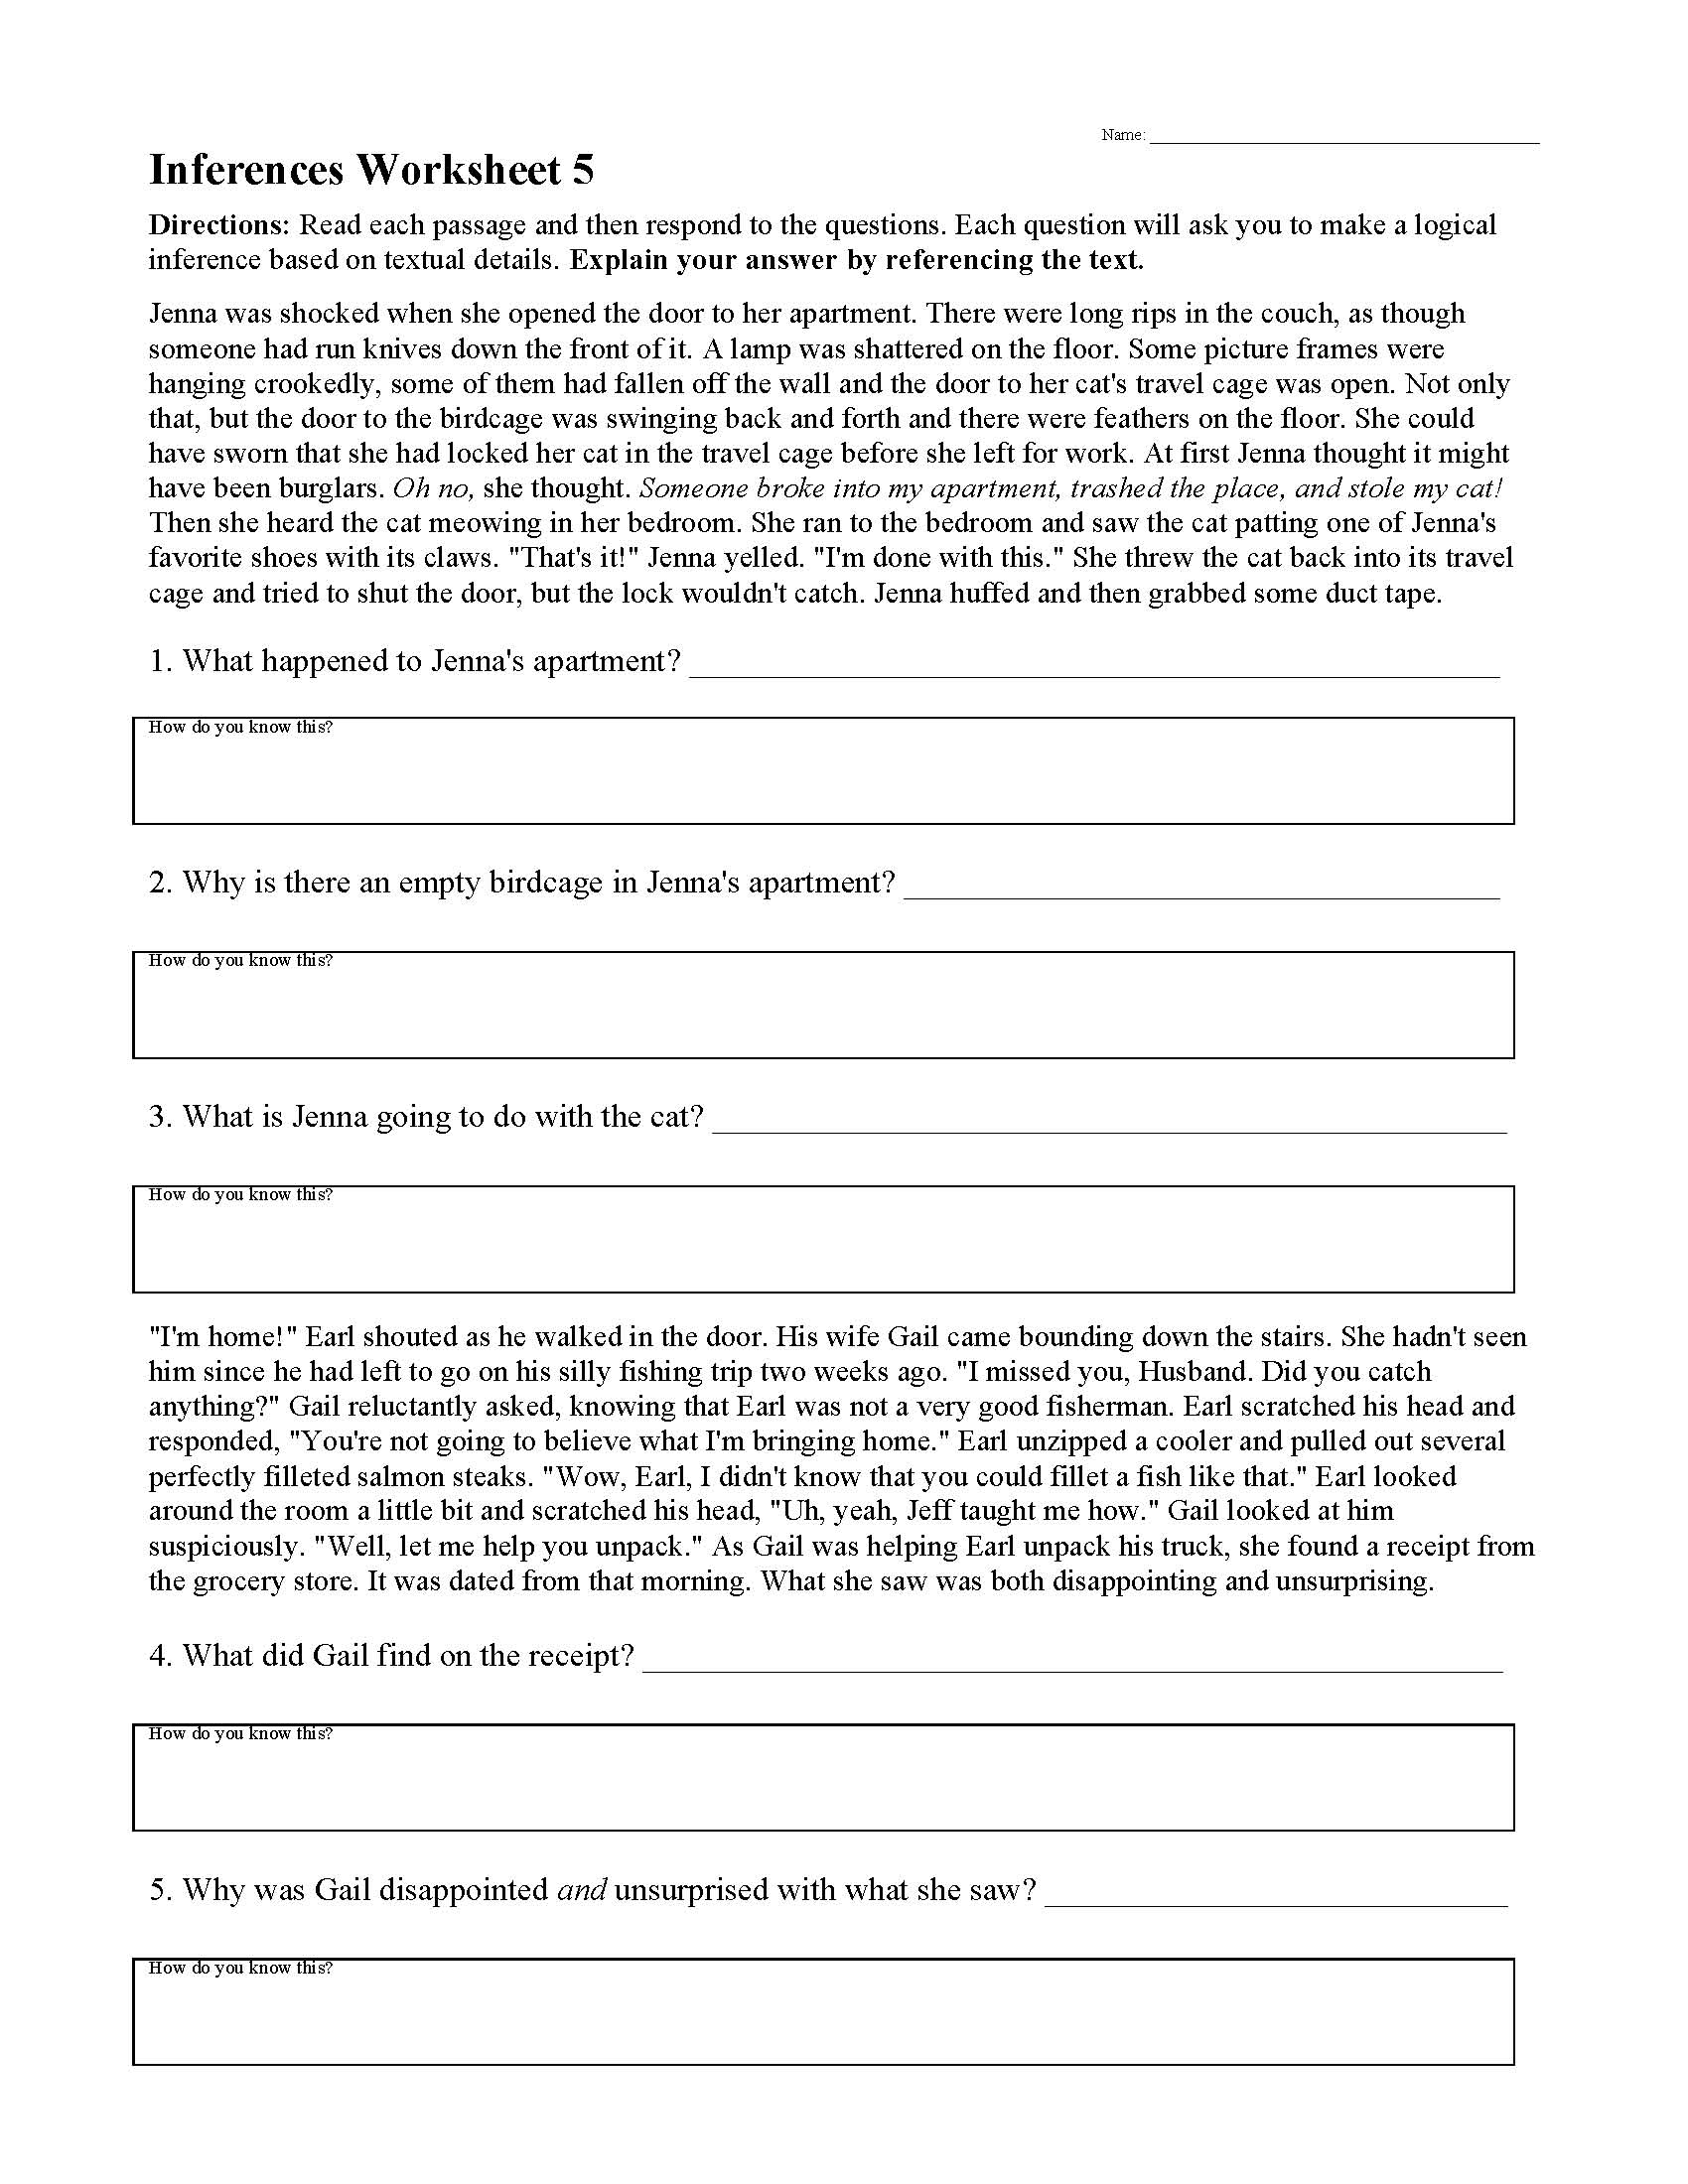 6th Grade Inference Worksheet